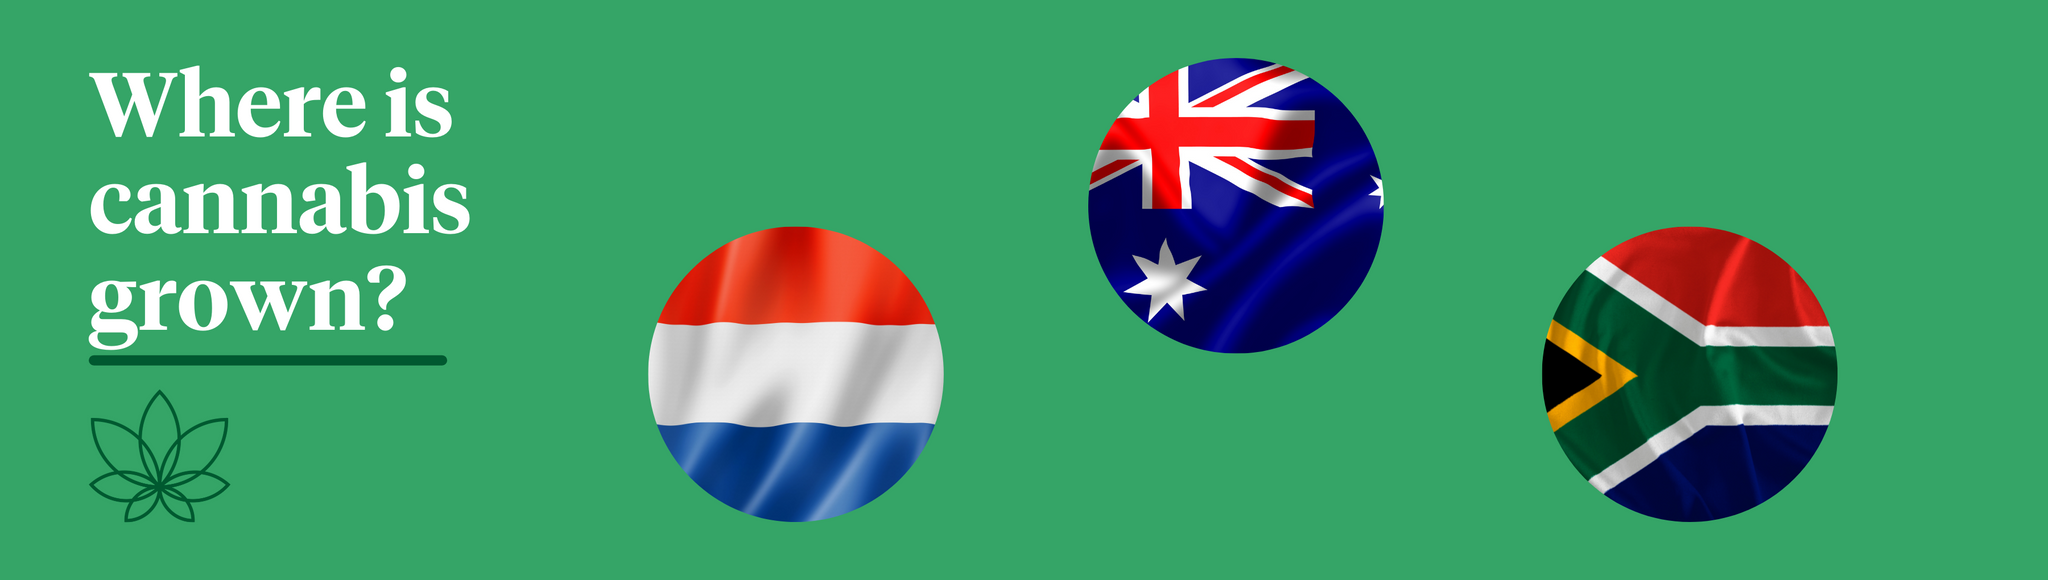 A green background with three flags of the Netherlands, Australia and South Africa with white text saying "Where is cannabis grown?"